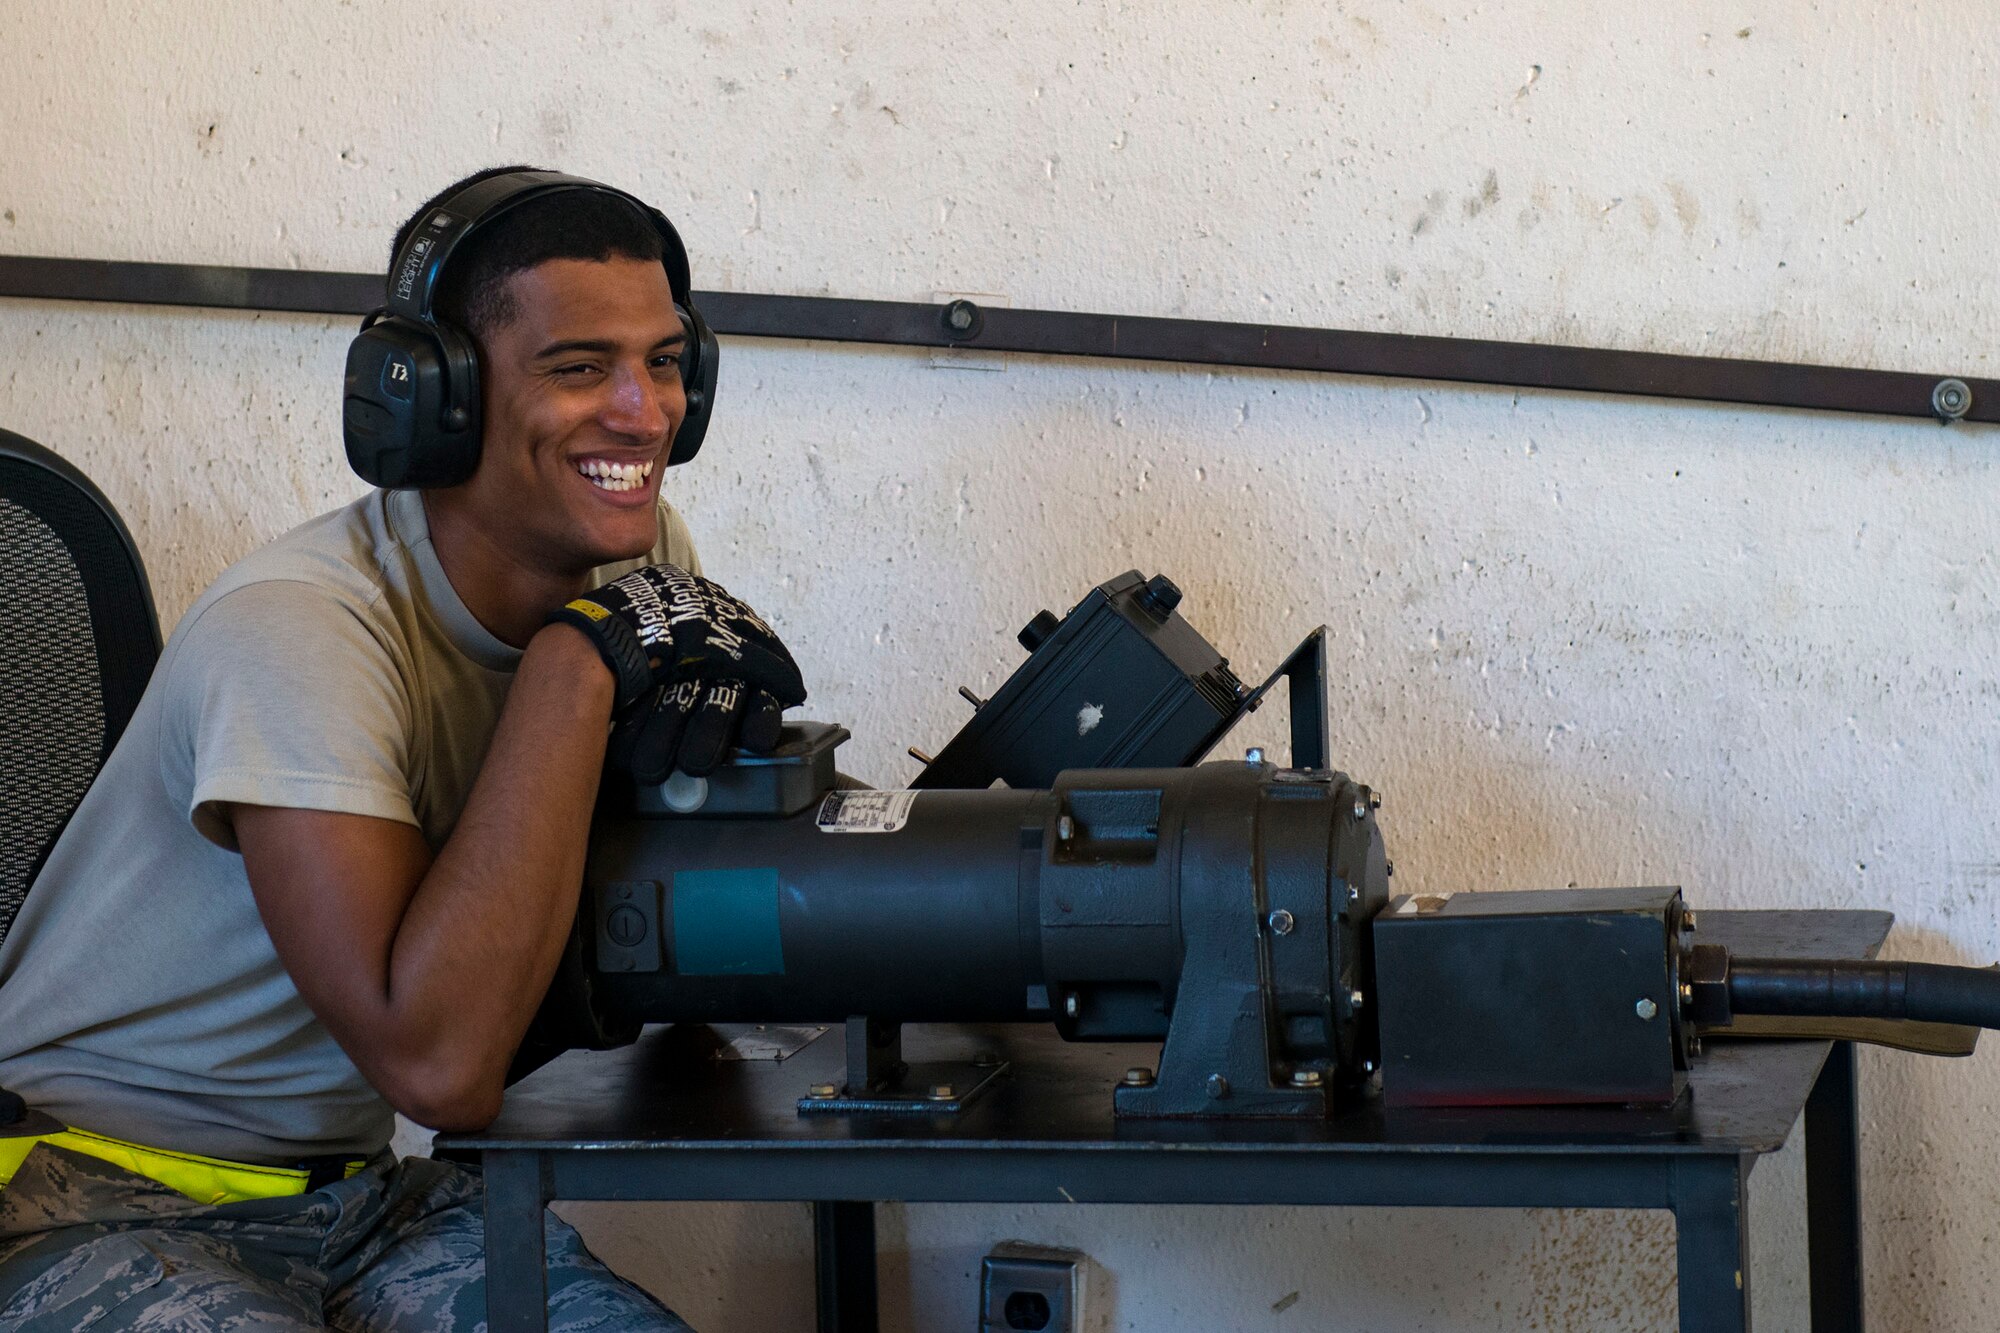 Senior Airman Skyler Hall, 23d Maintenance Squadron (MXS) crew chief, smiles during a 30mm rounds processing, July 11, 2018, at Moody Air Force Base, Ga. This total force integration training with the 23d and 476th MXS allowed Airmen to work together to identify more ways to efficiently and safely conduct their mission. The munitions flight ensures the A-10C Thunderbolt IIs are armed with 30mm rounds to make sure they are able to continue their mission while at home station and deployed. (U.S. Air Force photo by Airman 1st Class Erick Requadt)